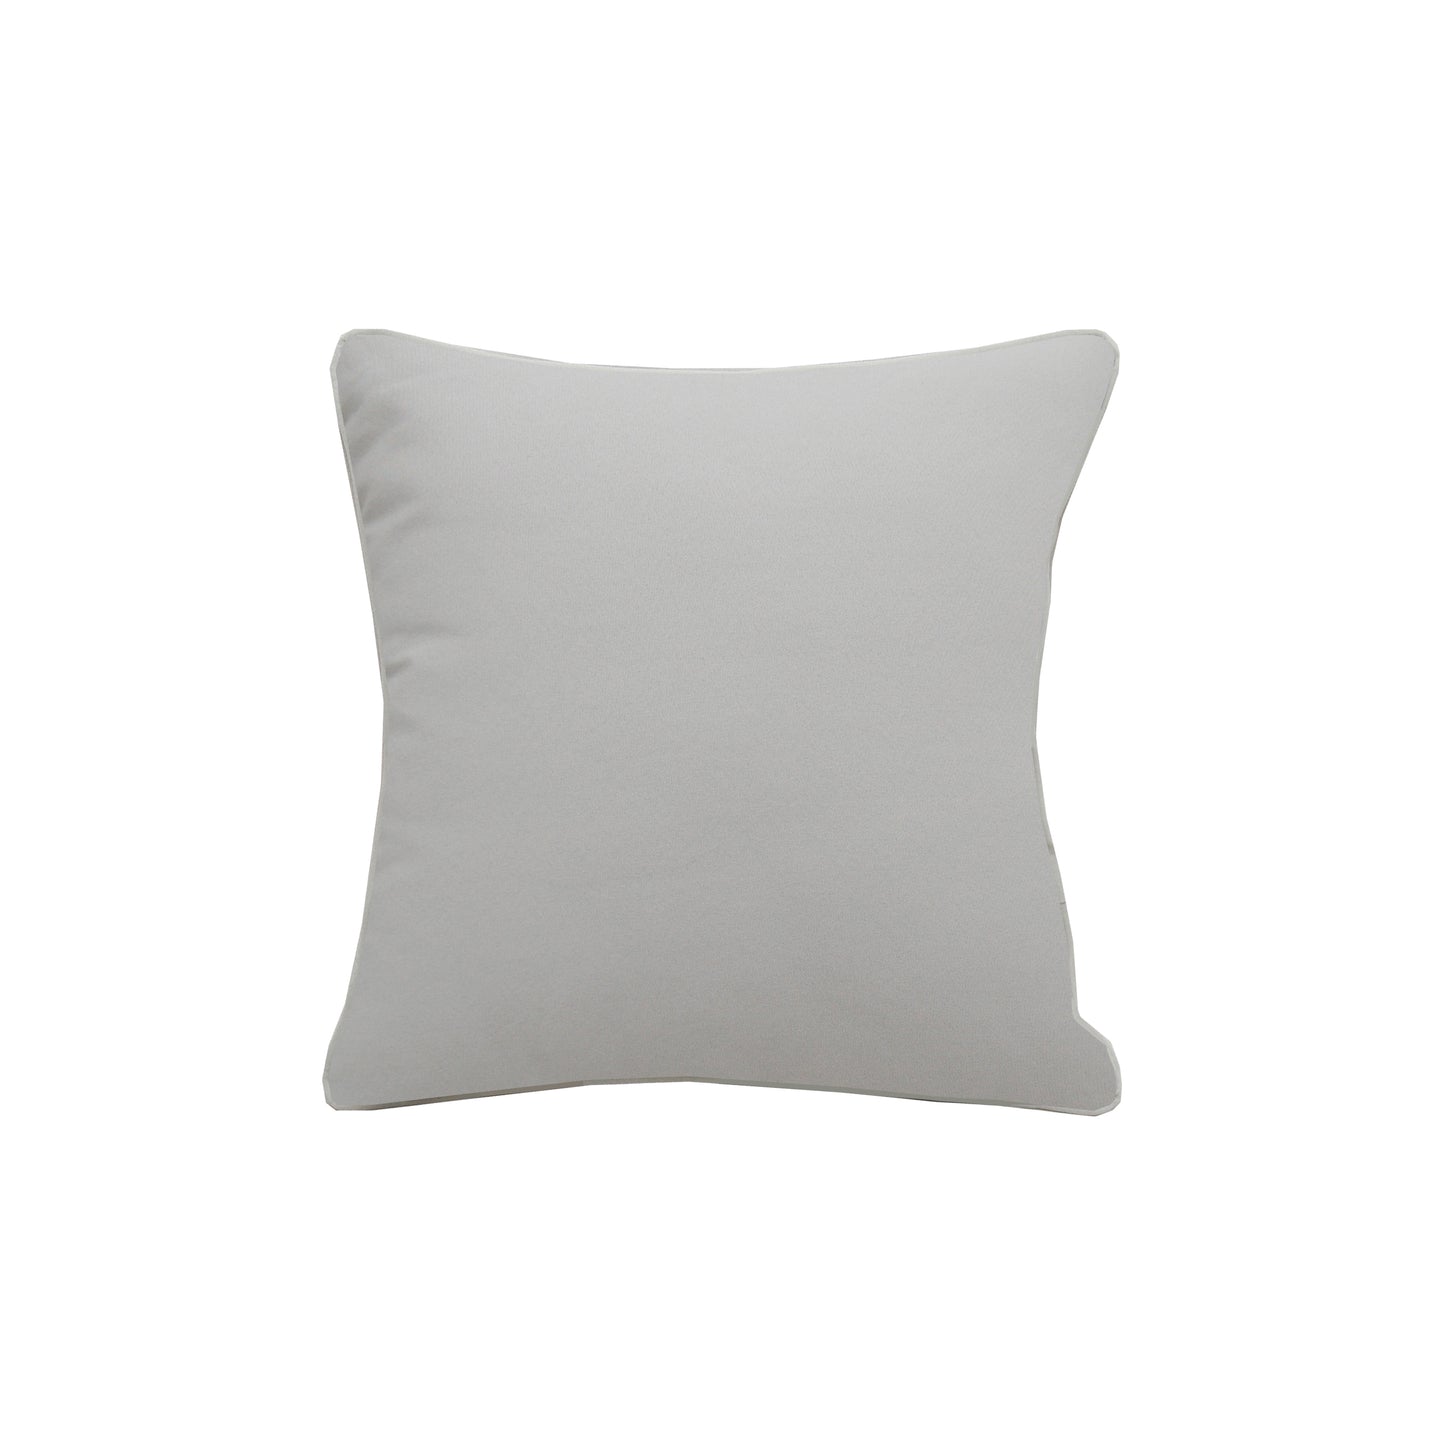 Soldi grey fabric; back side of the Sandpiper Sprinting Right Outdoor Pillow